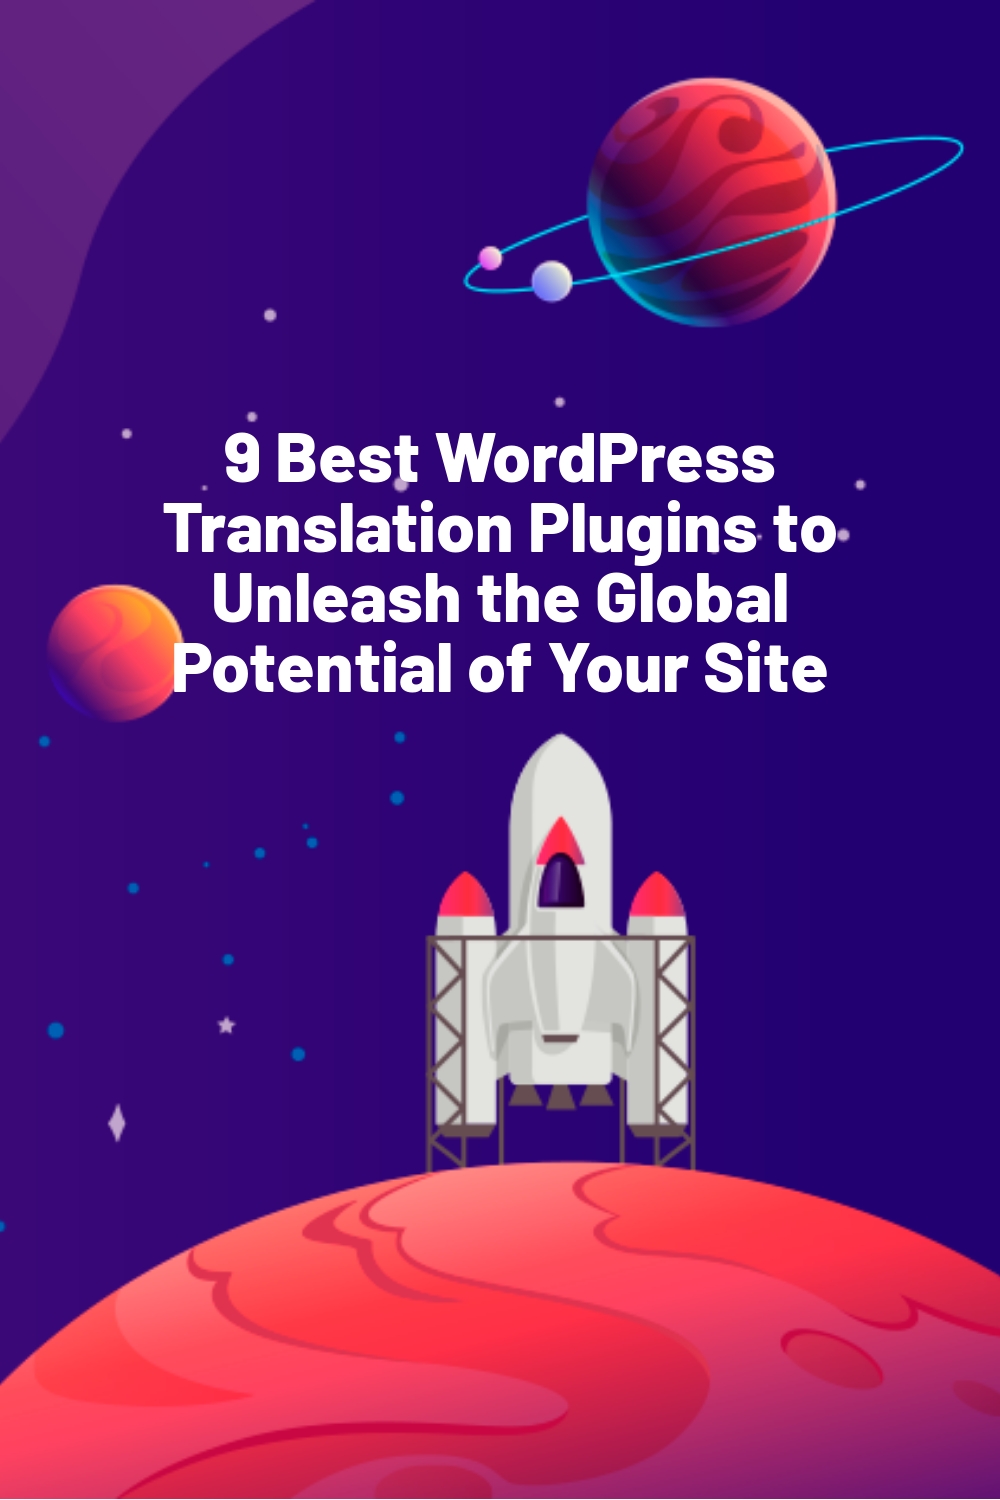 9 Best WordPress Translation Plugins to Unleash the Global Potential of Your Site